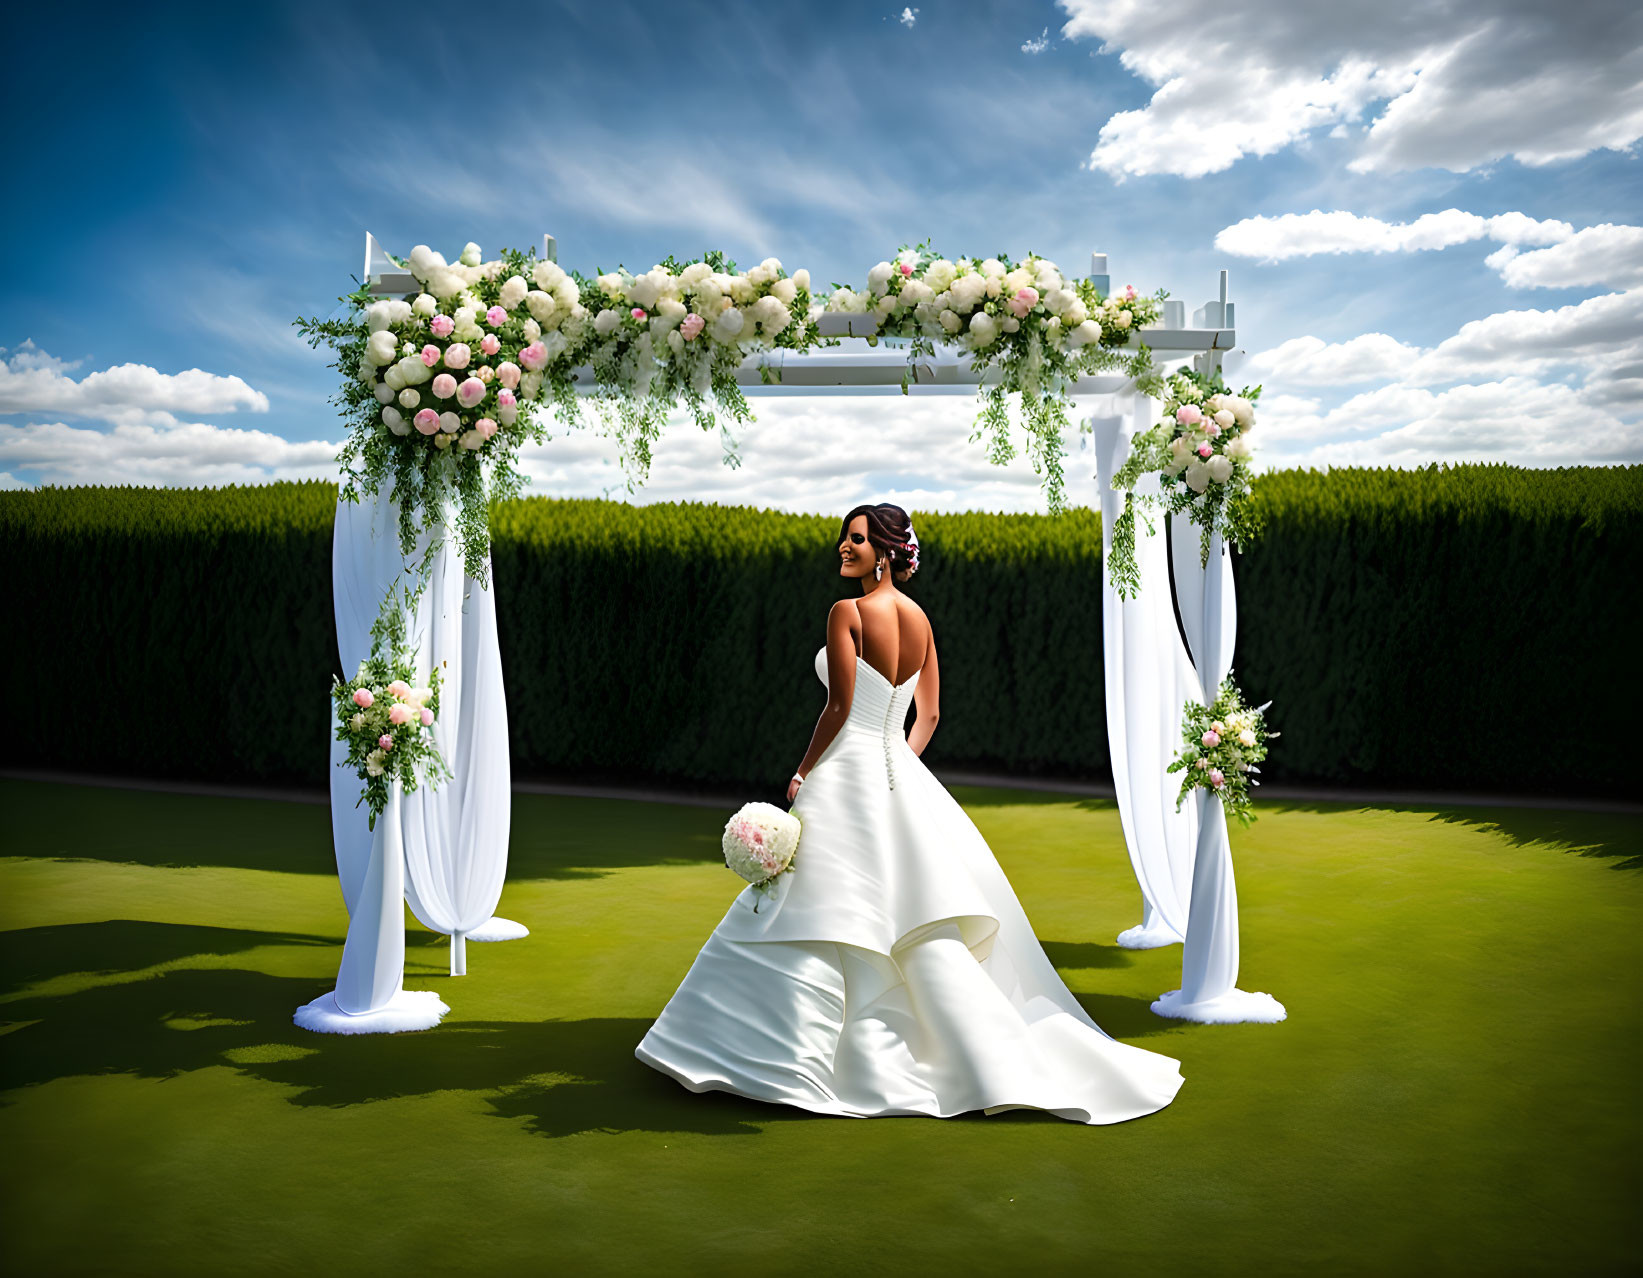 Bride in white gown under floral arch in field with dramatic sky